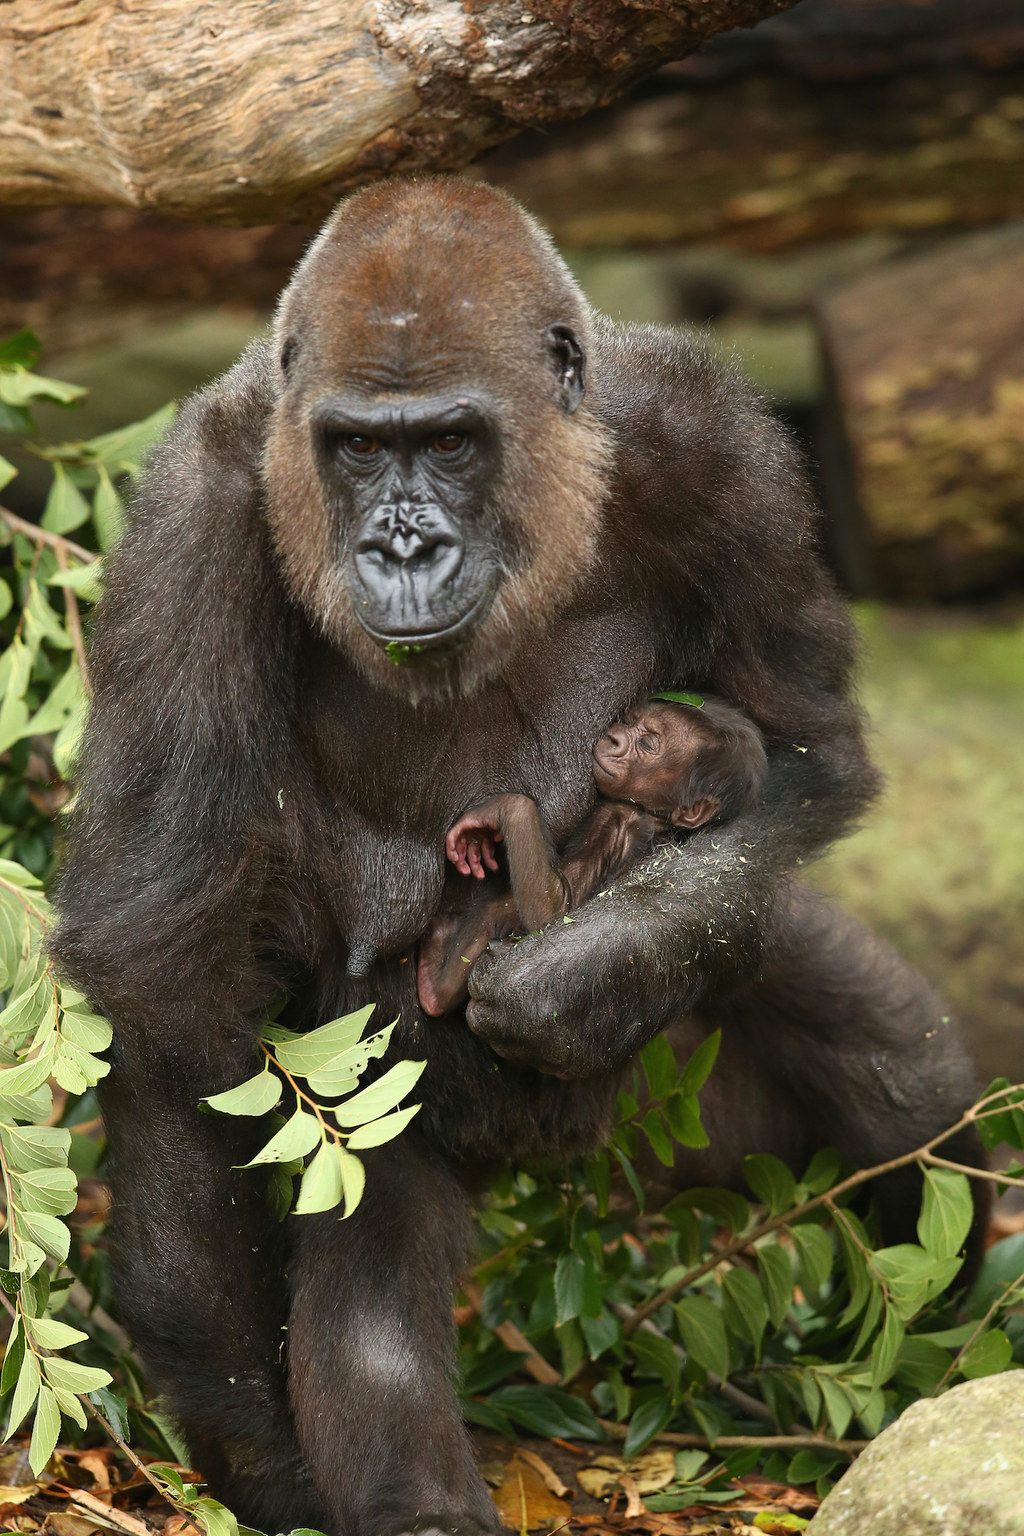 This Newborn Baby Gorilla Will Make You Miss Your Mommy